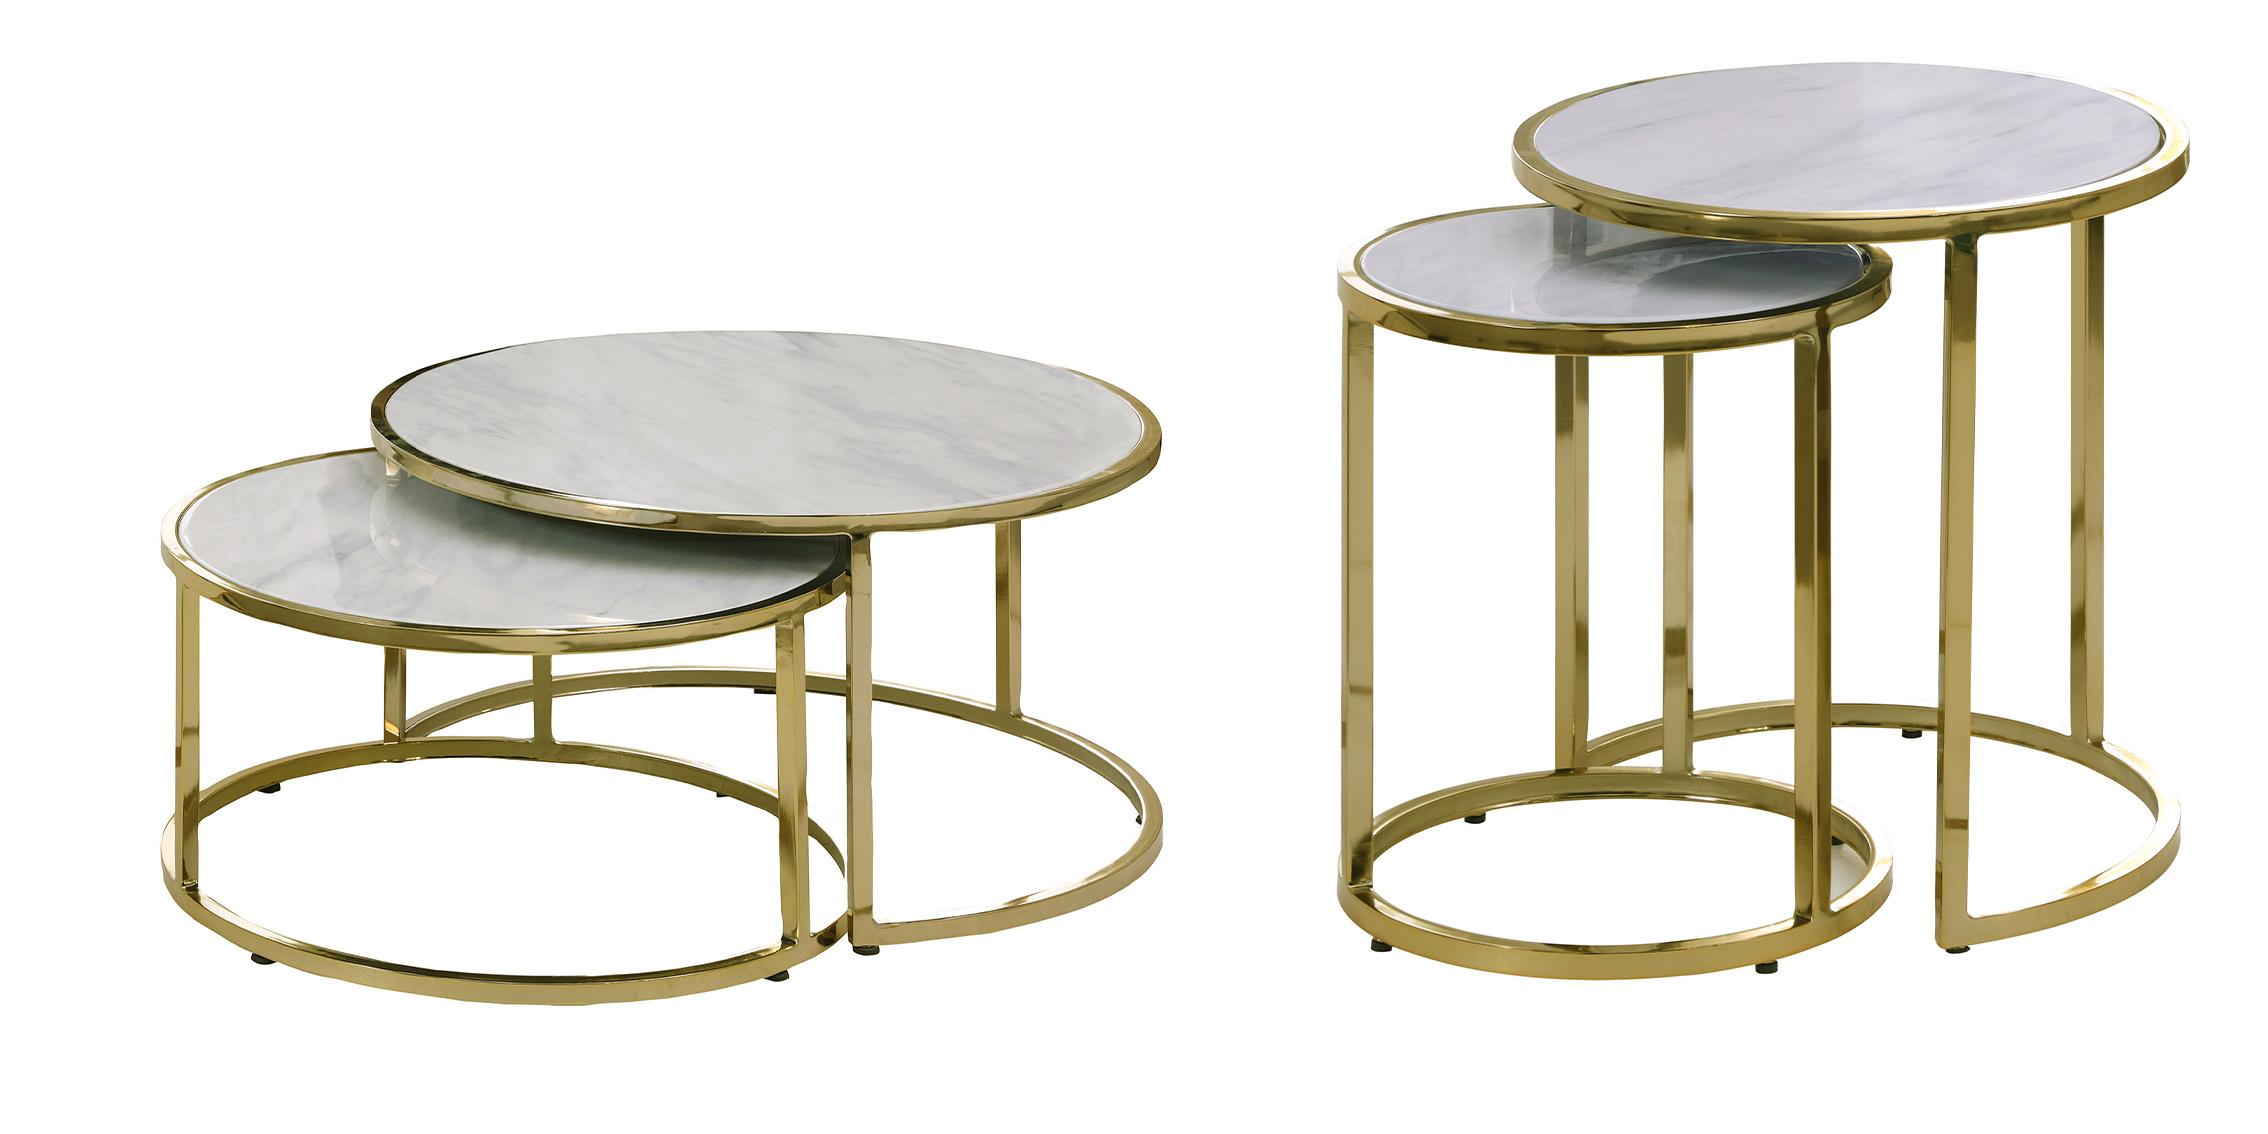 Contemporary Coffee Table Set MASSIMO207-C-Set-2 207-C-Set-2 in White, Gold Faux Marble